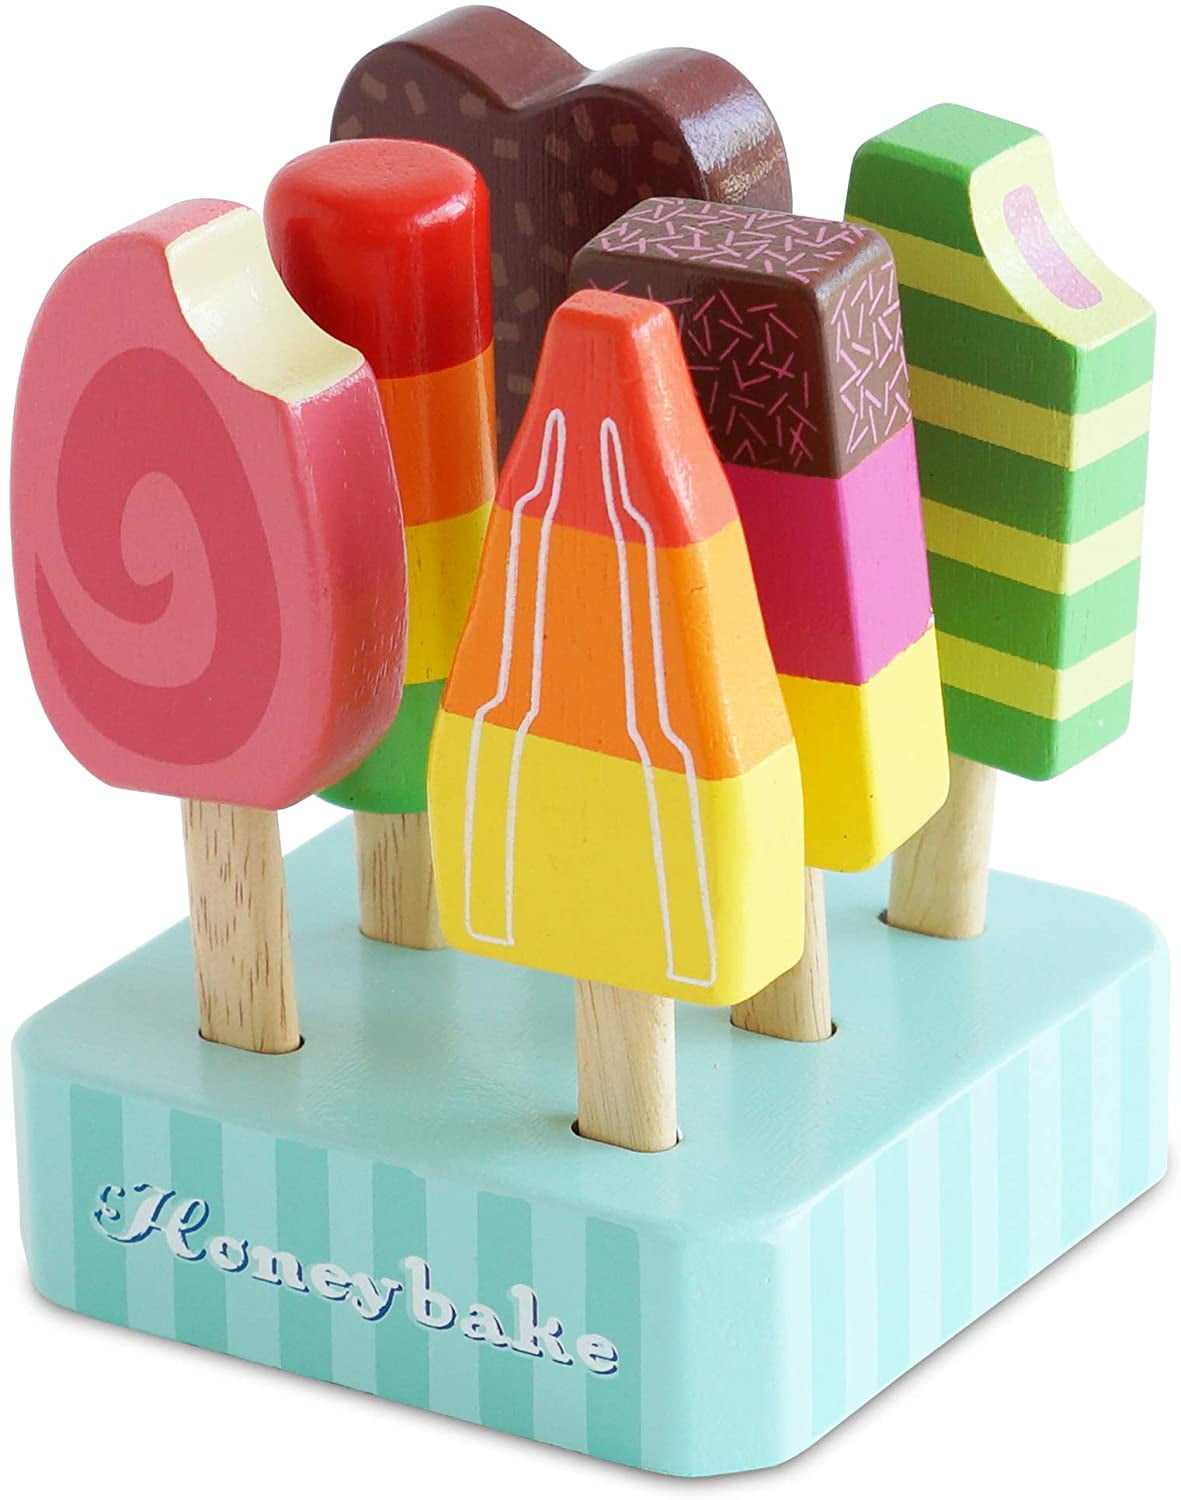 Educational Wooden Toy Honeybake Colourful Wooden Carlos Gelato Pretend Ice Cream Toy 2+ Years Le Toy Van 12 Pieces Great Role Play Gifts For A Boy Or Girl 